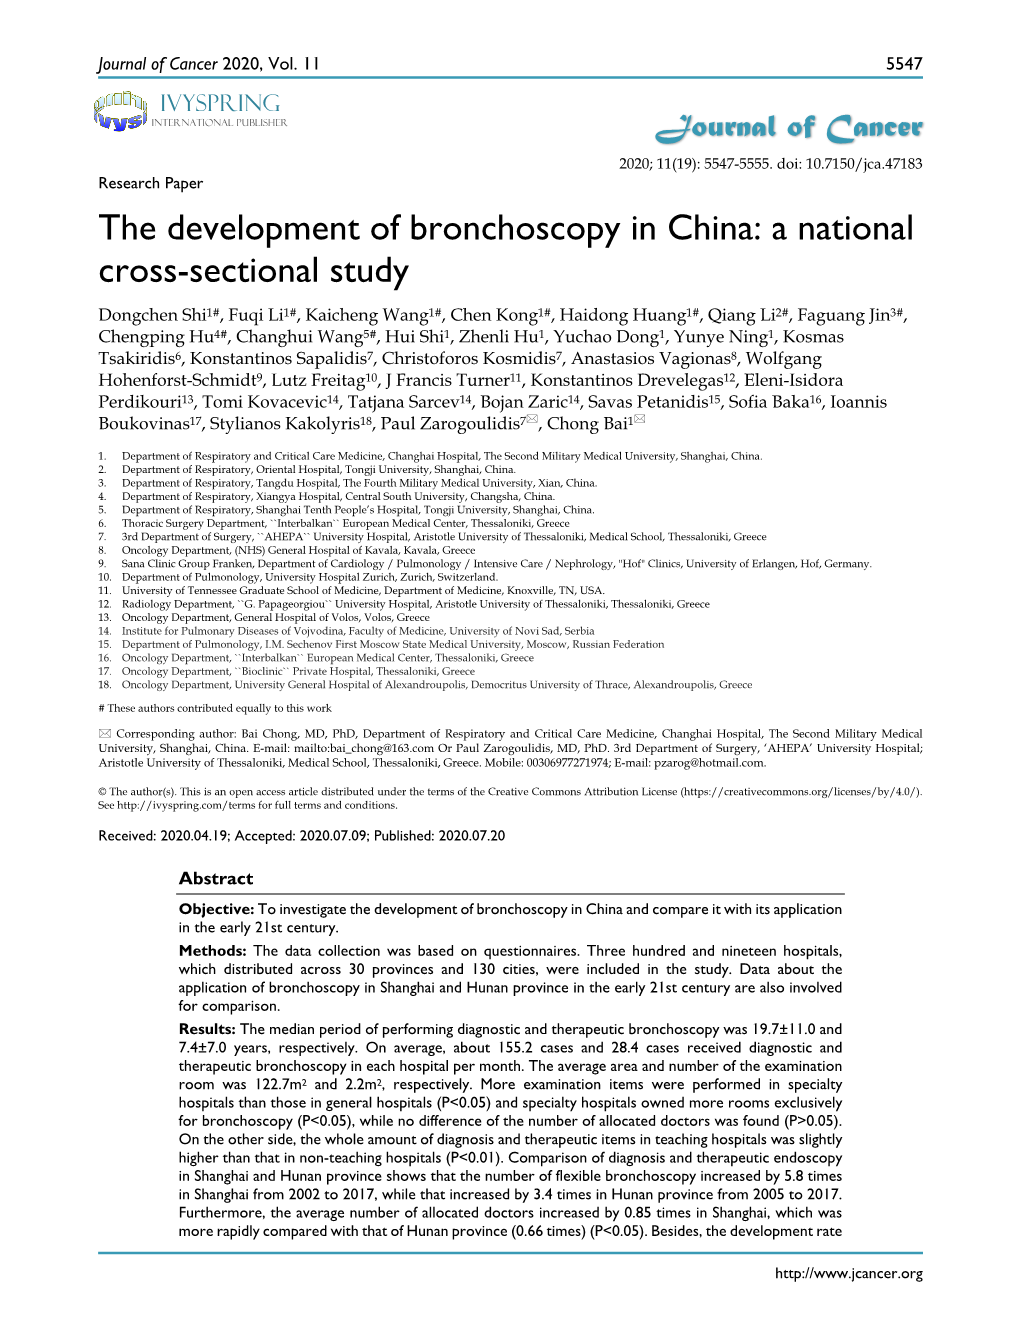 The Development of Bronchoscopy in China: A